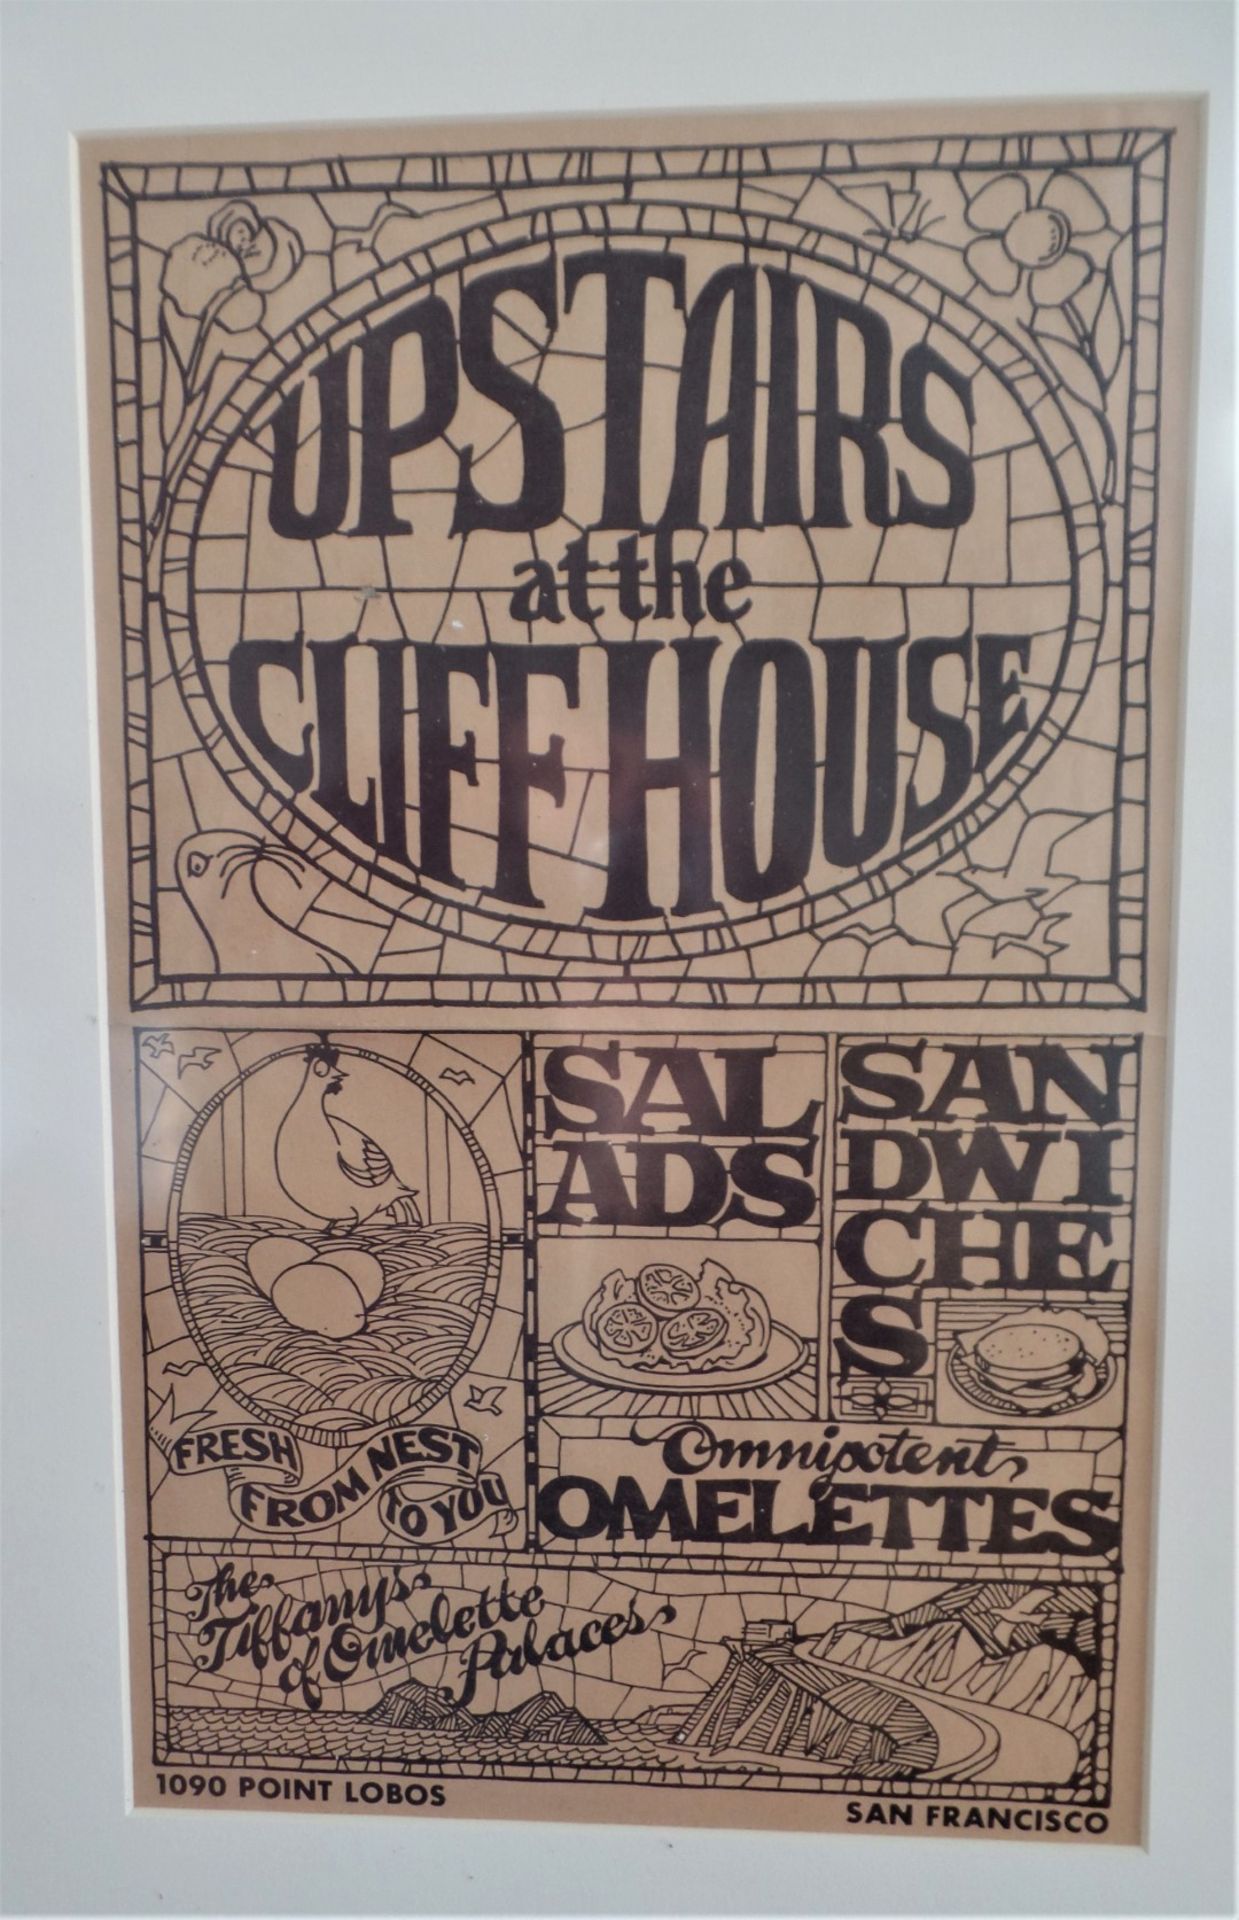 Framed Menu Cover - 'Upstairs at the Cliff House' - Image 2 of 2